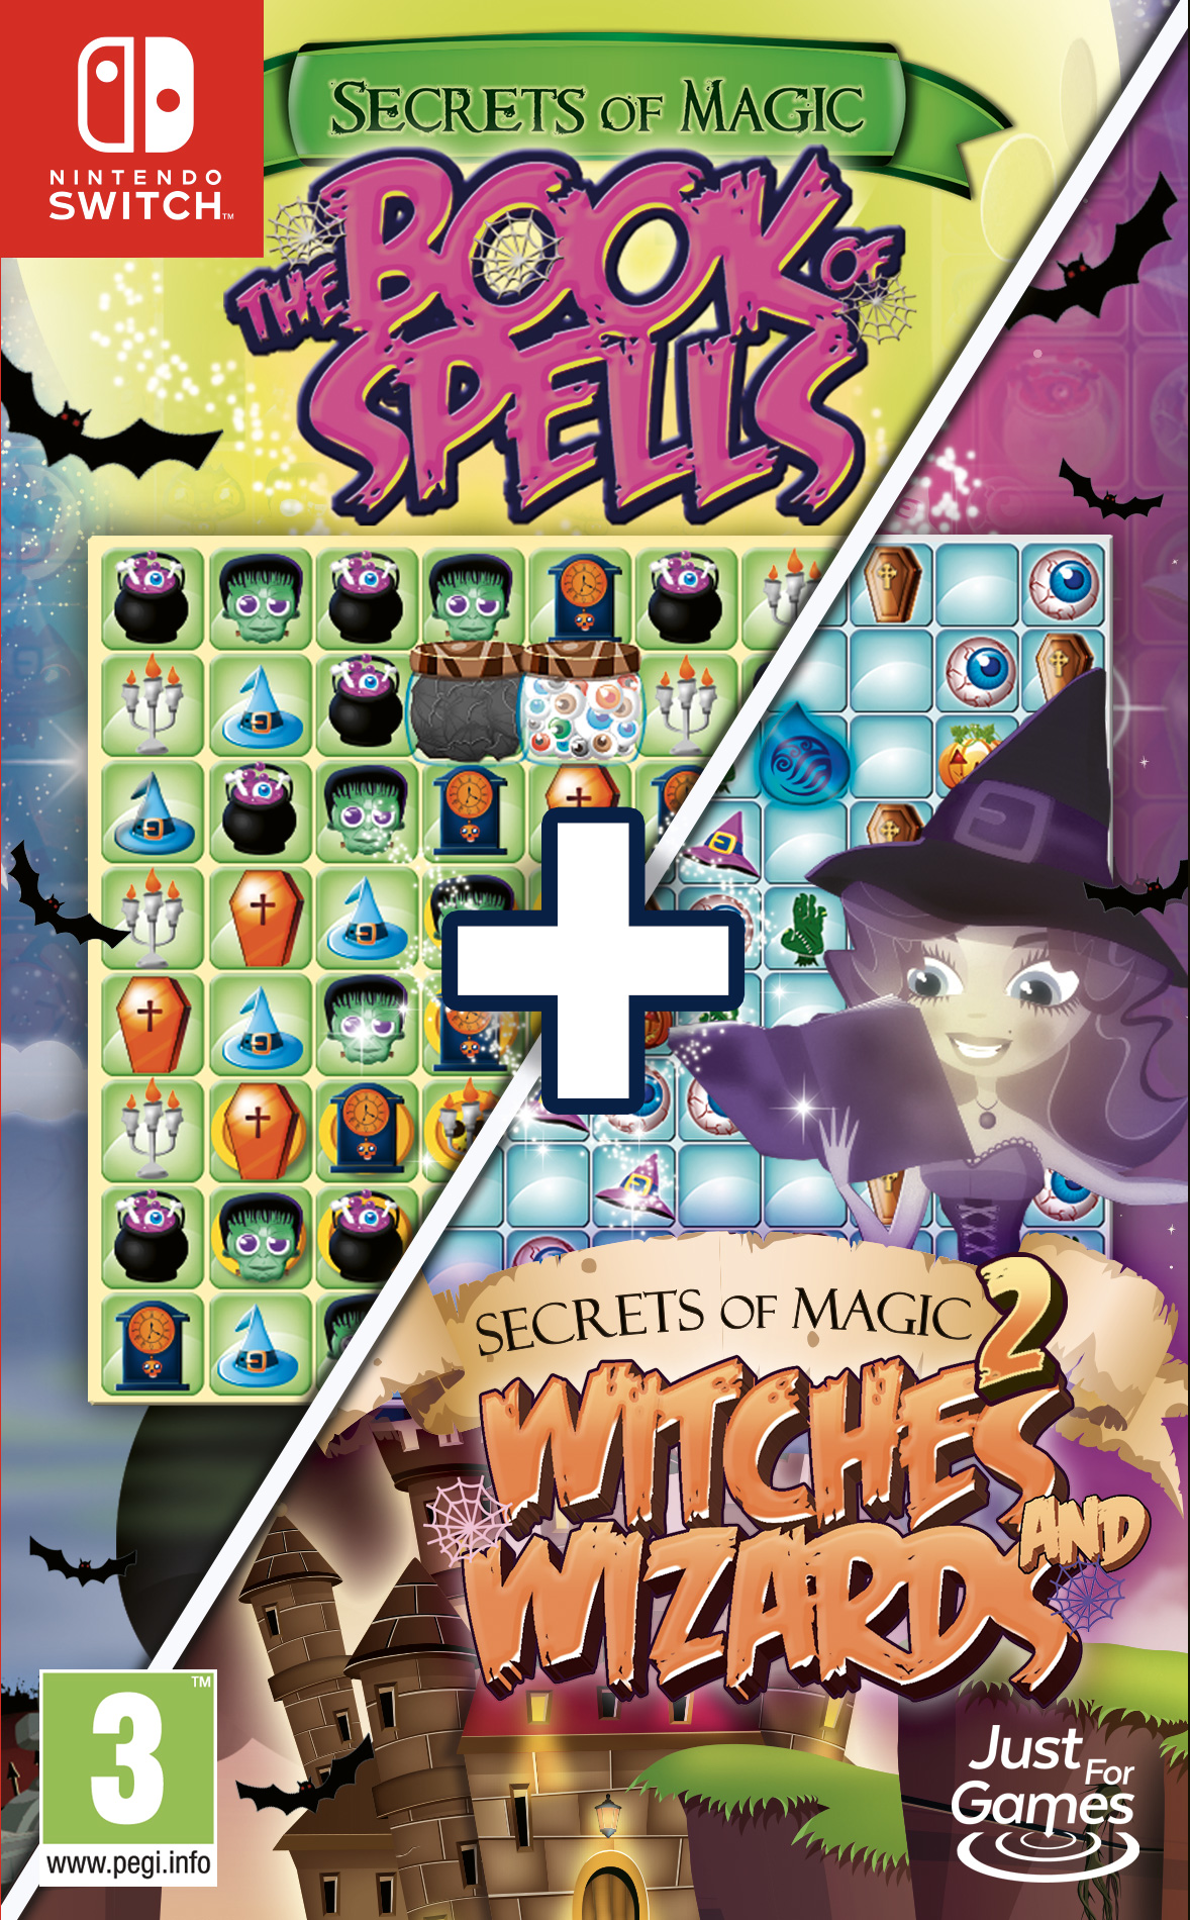 Secrets of Magic : The Book of Spells + Secrets of Magic 2 : Witches and Wizards